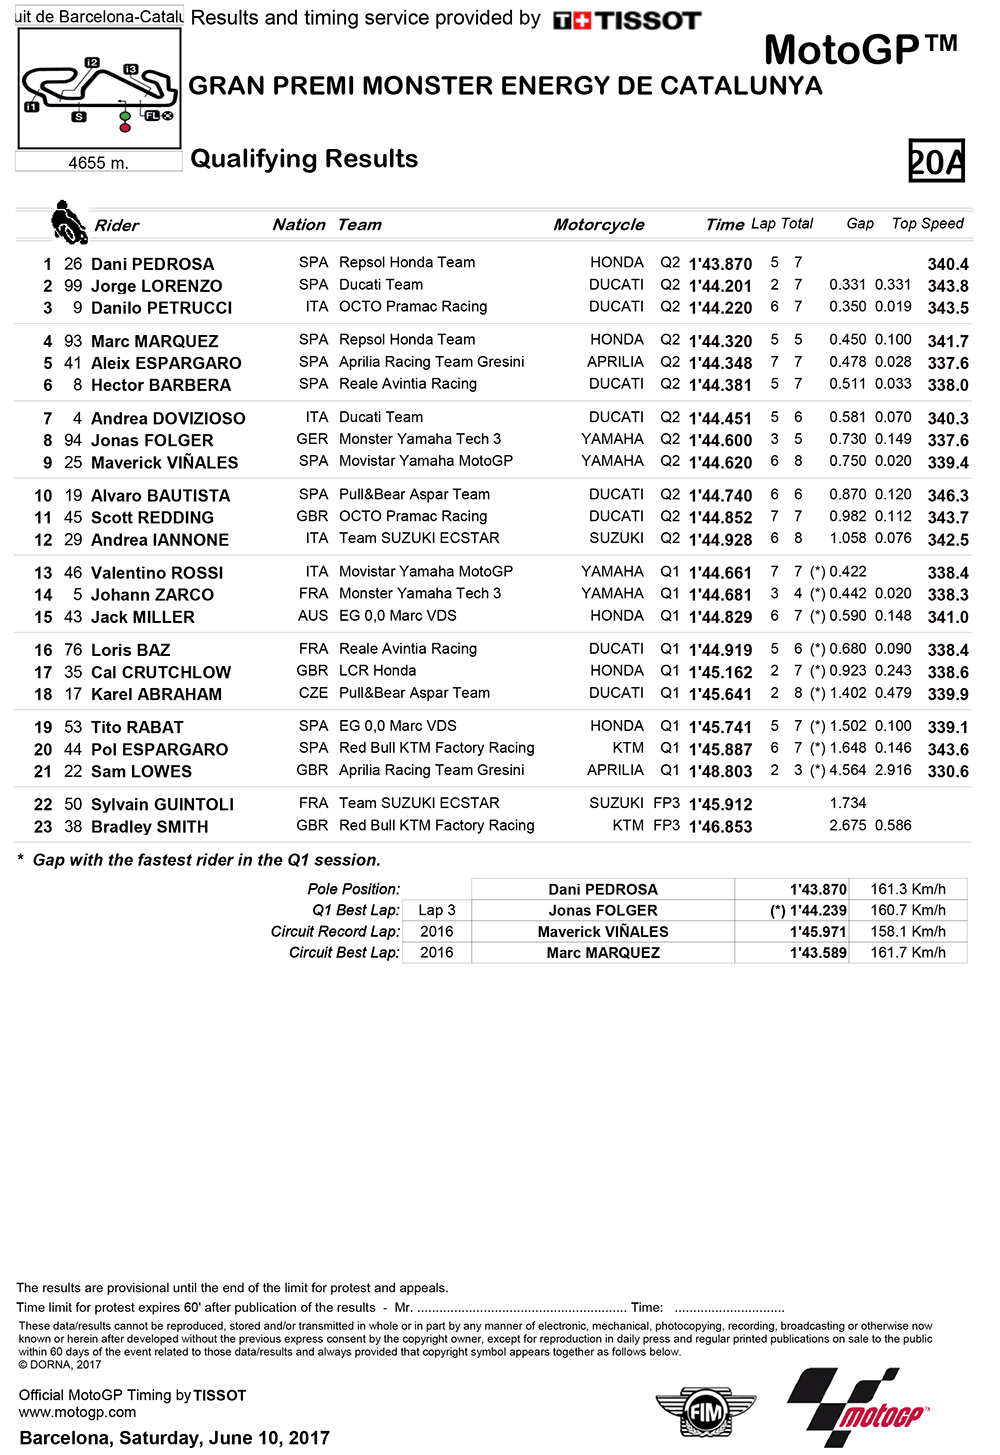 Qualifying times and starting positions